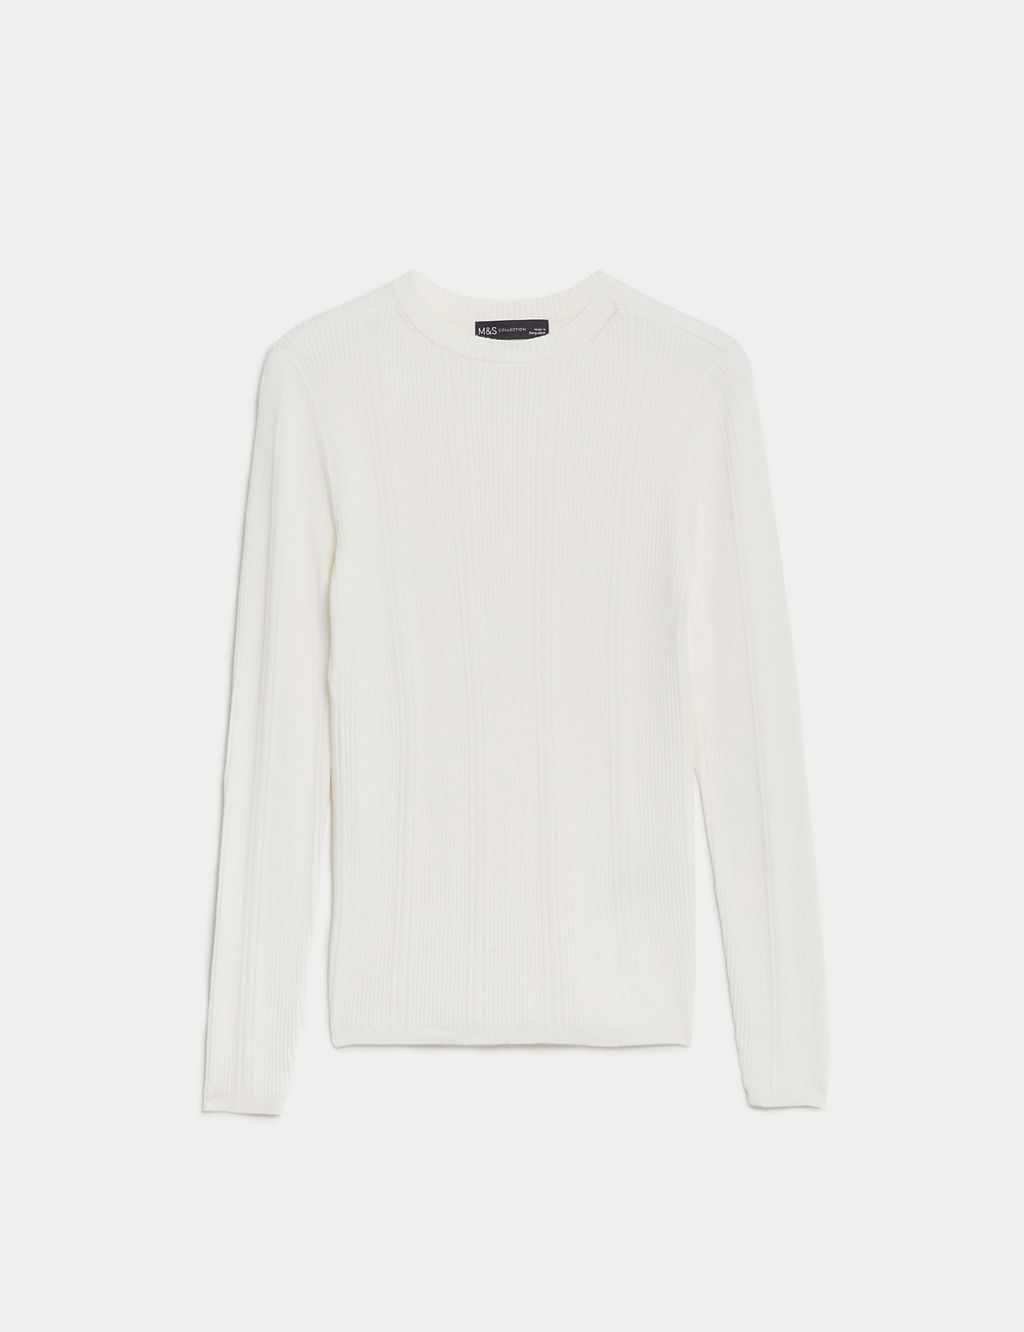 Ribbed Crew Neck Fitted Knitted Top | M&S Collection | M&S